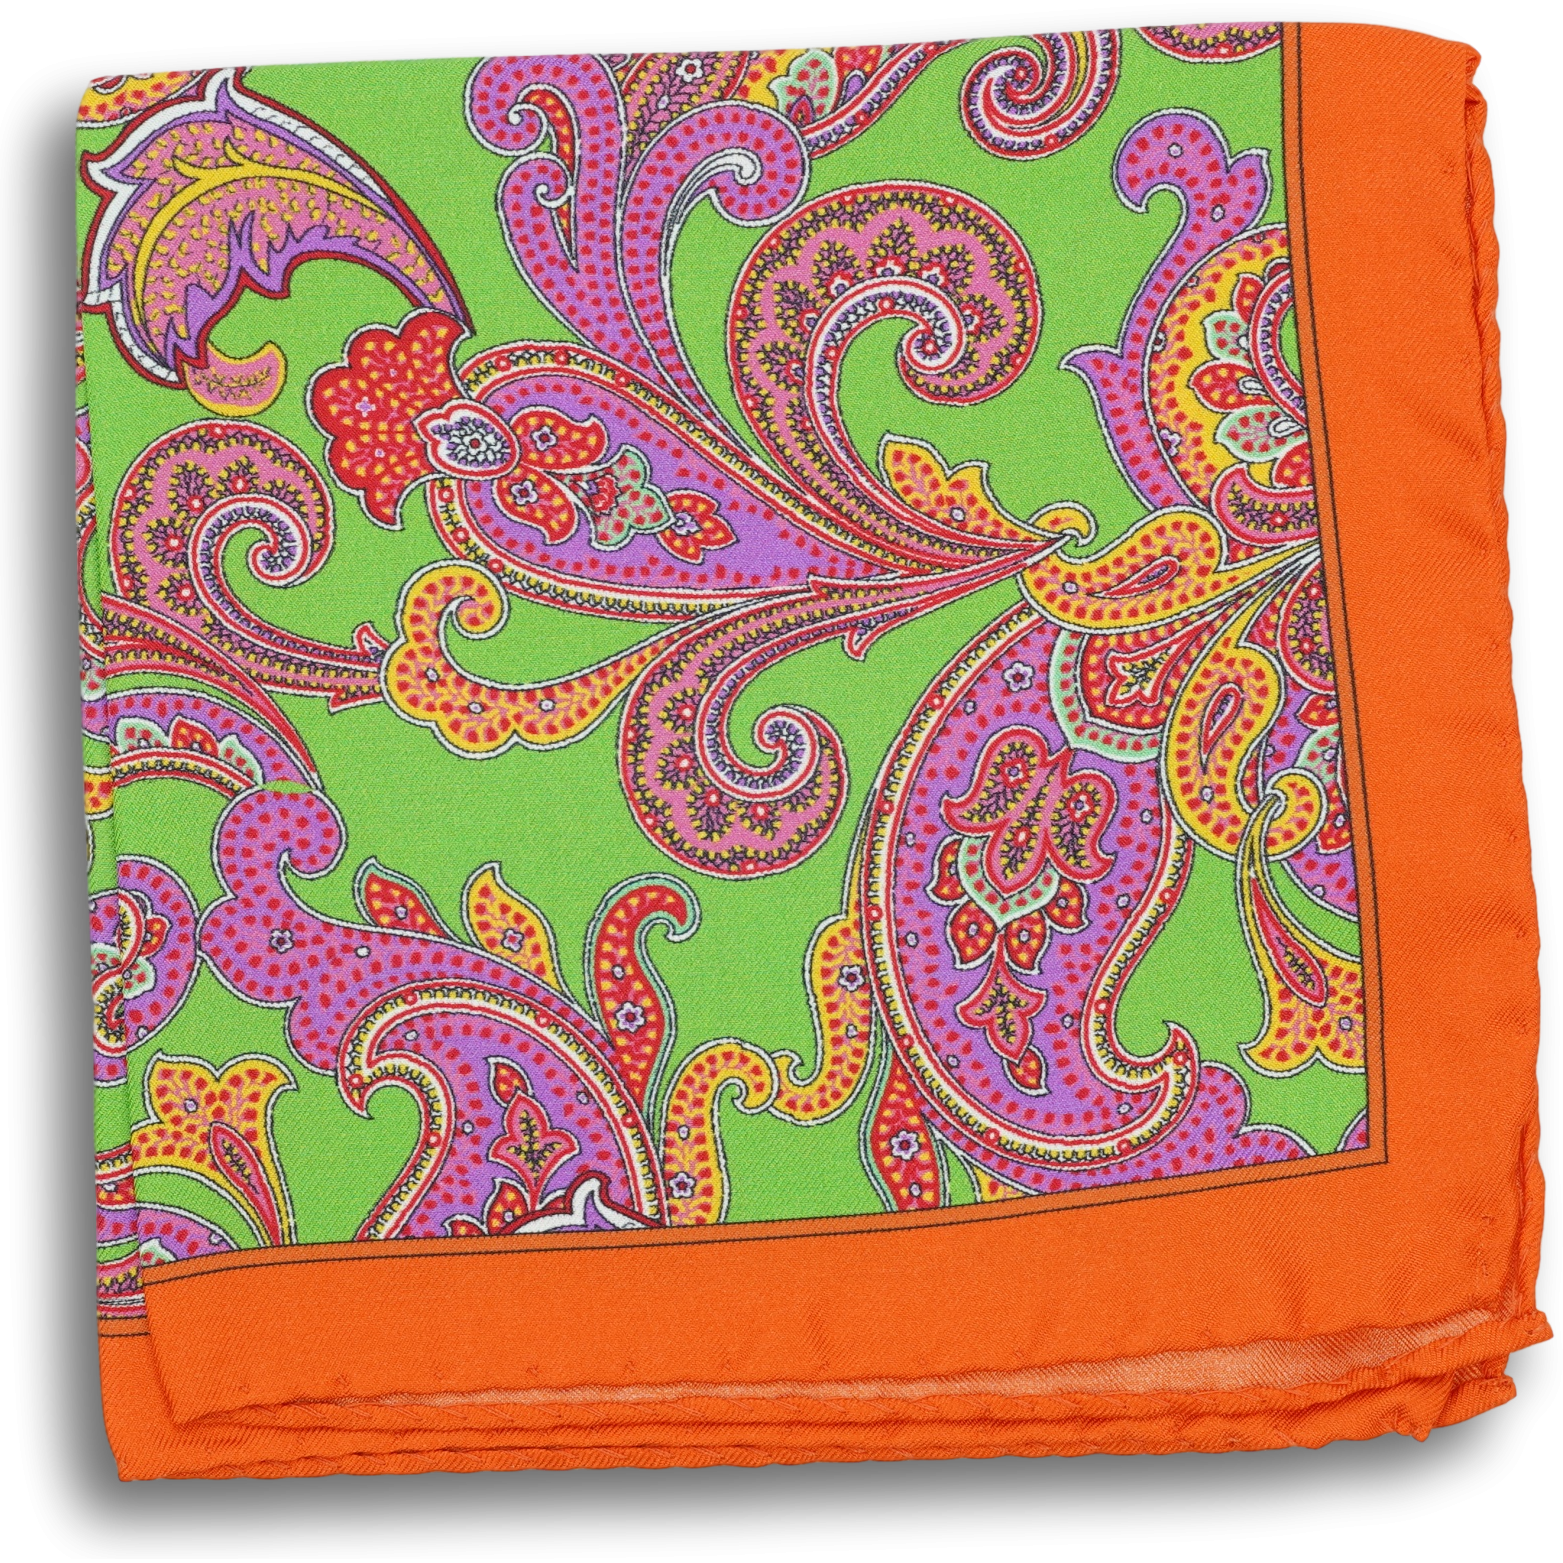 Multicolored Paisley Patterned Silk Pocket Square